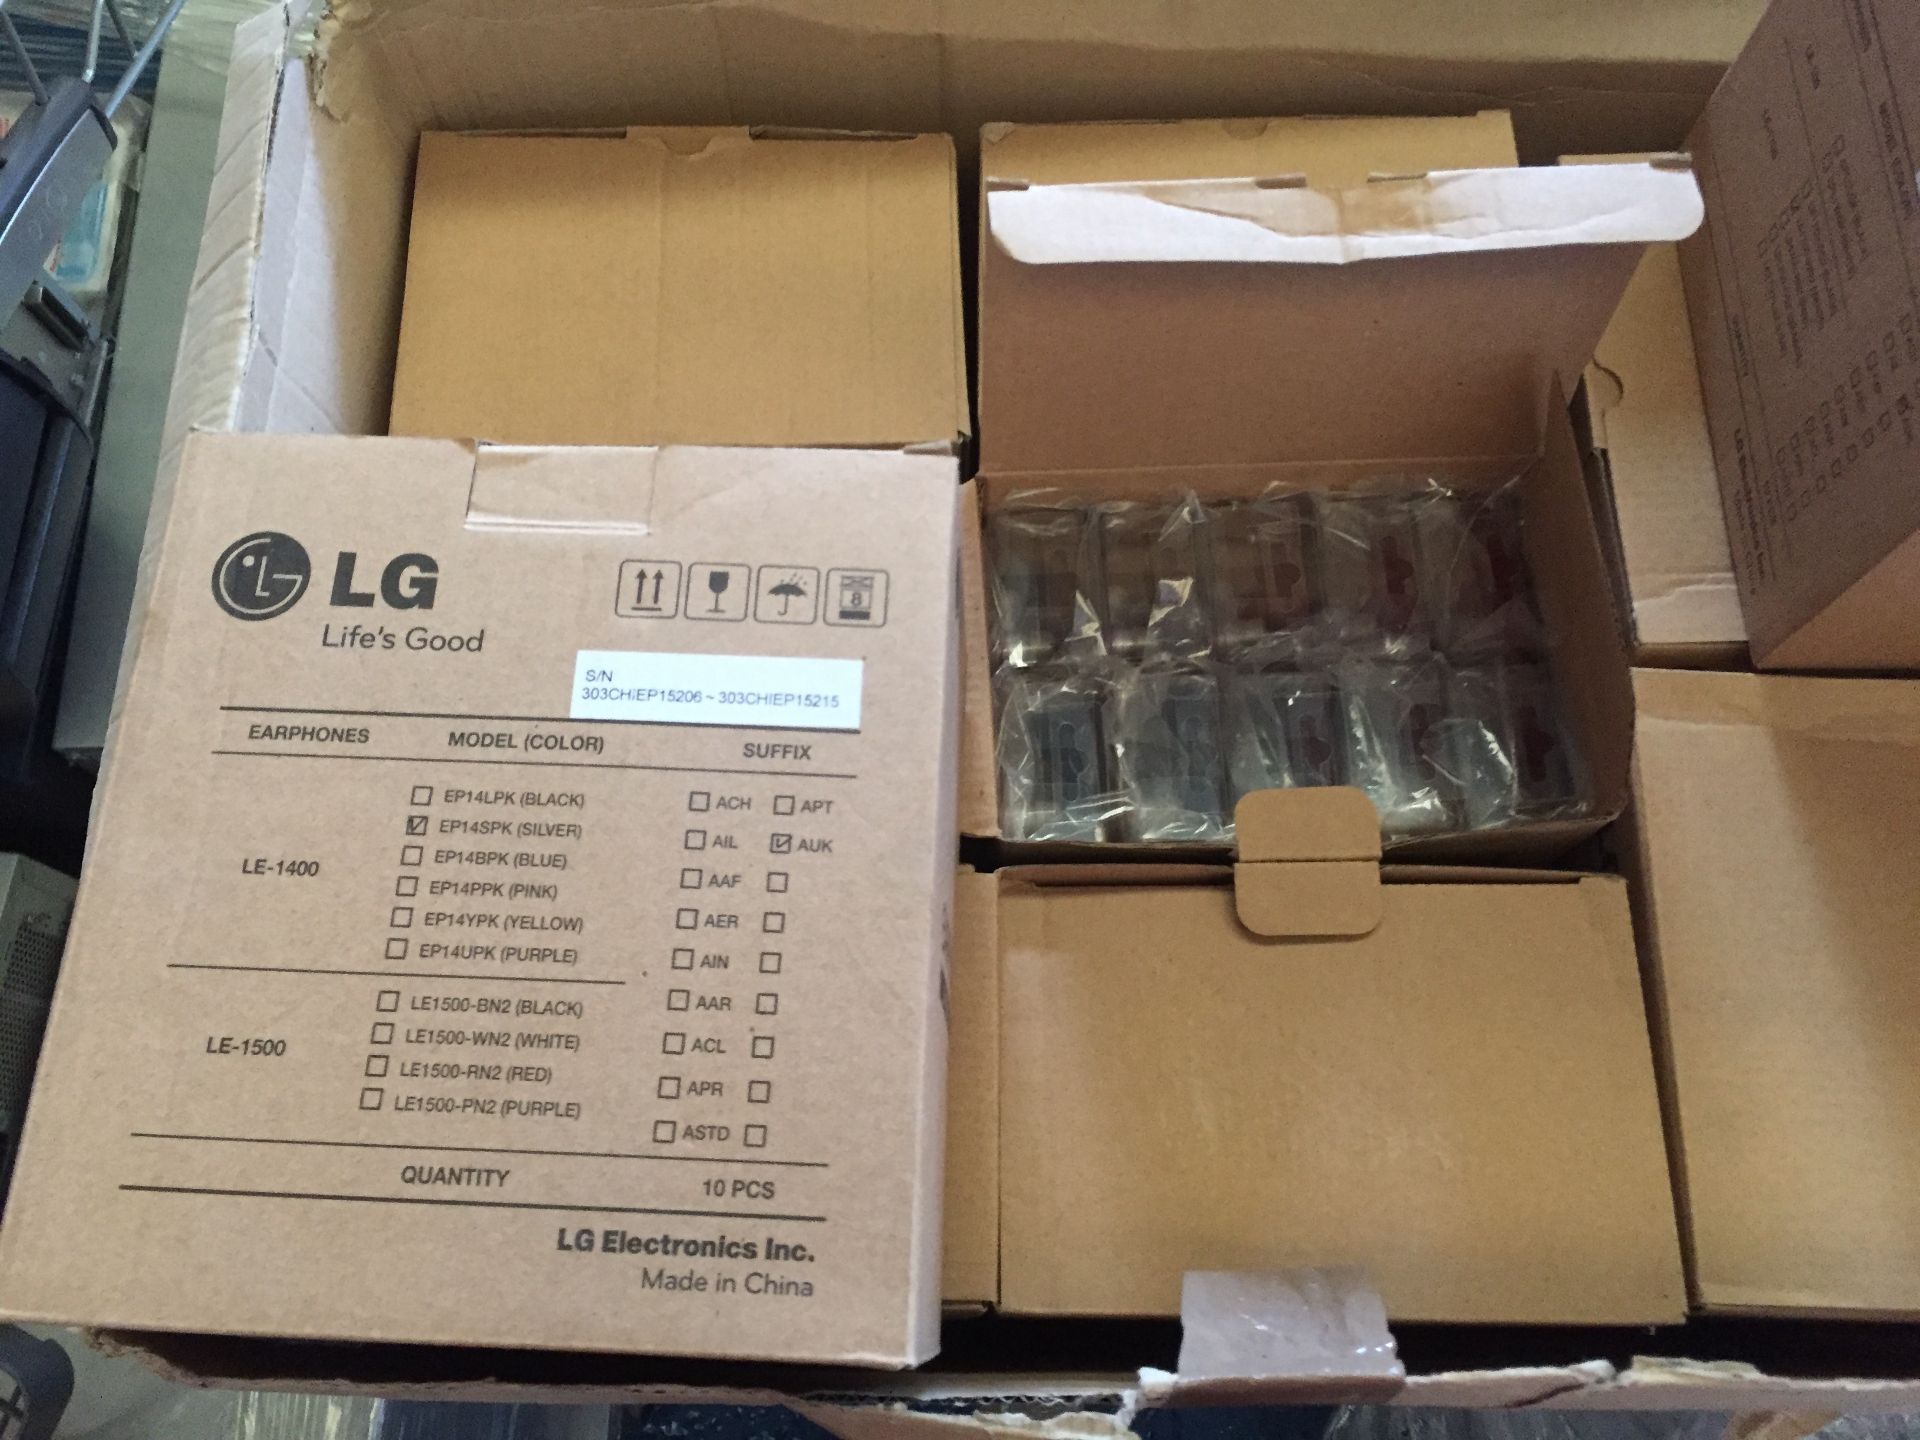 100 X LG LG LE-1700 Earphones with Flat Cable for iPhone/Galaxy Brand New - Image 2 of 5